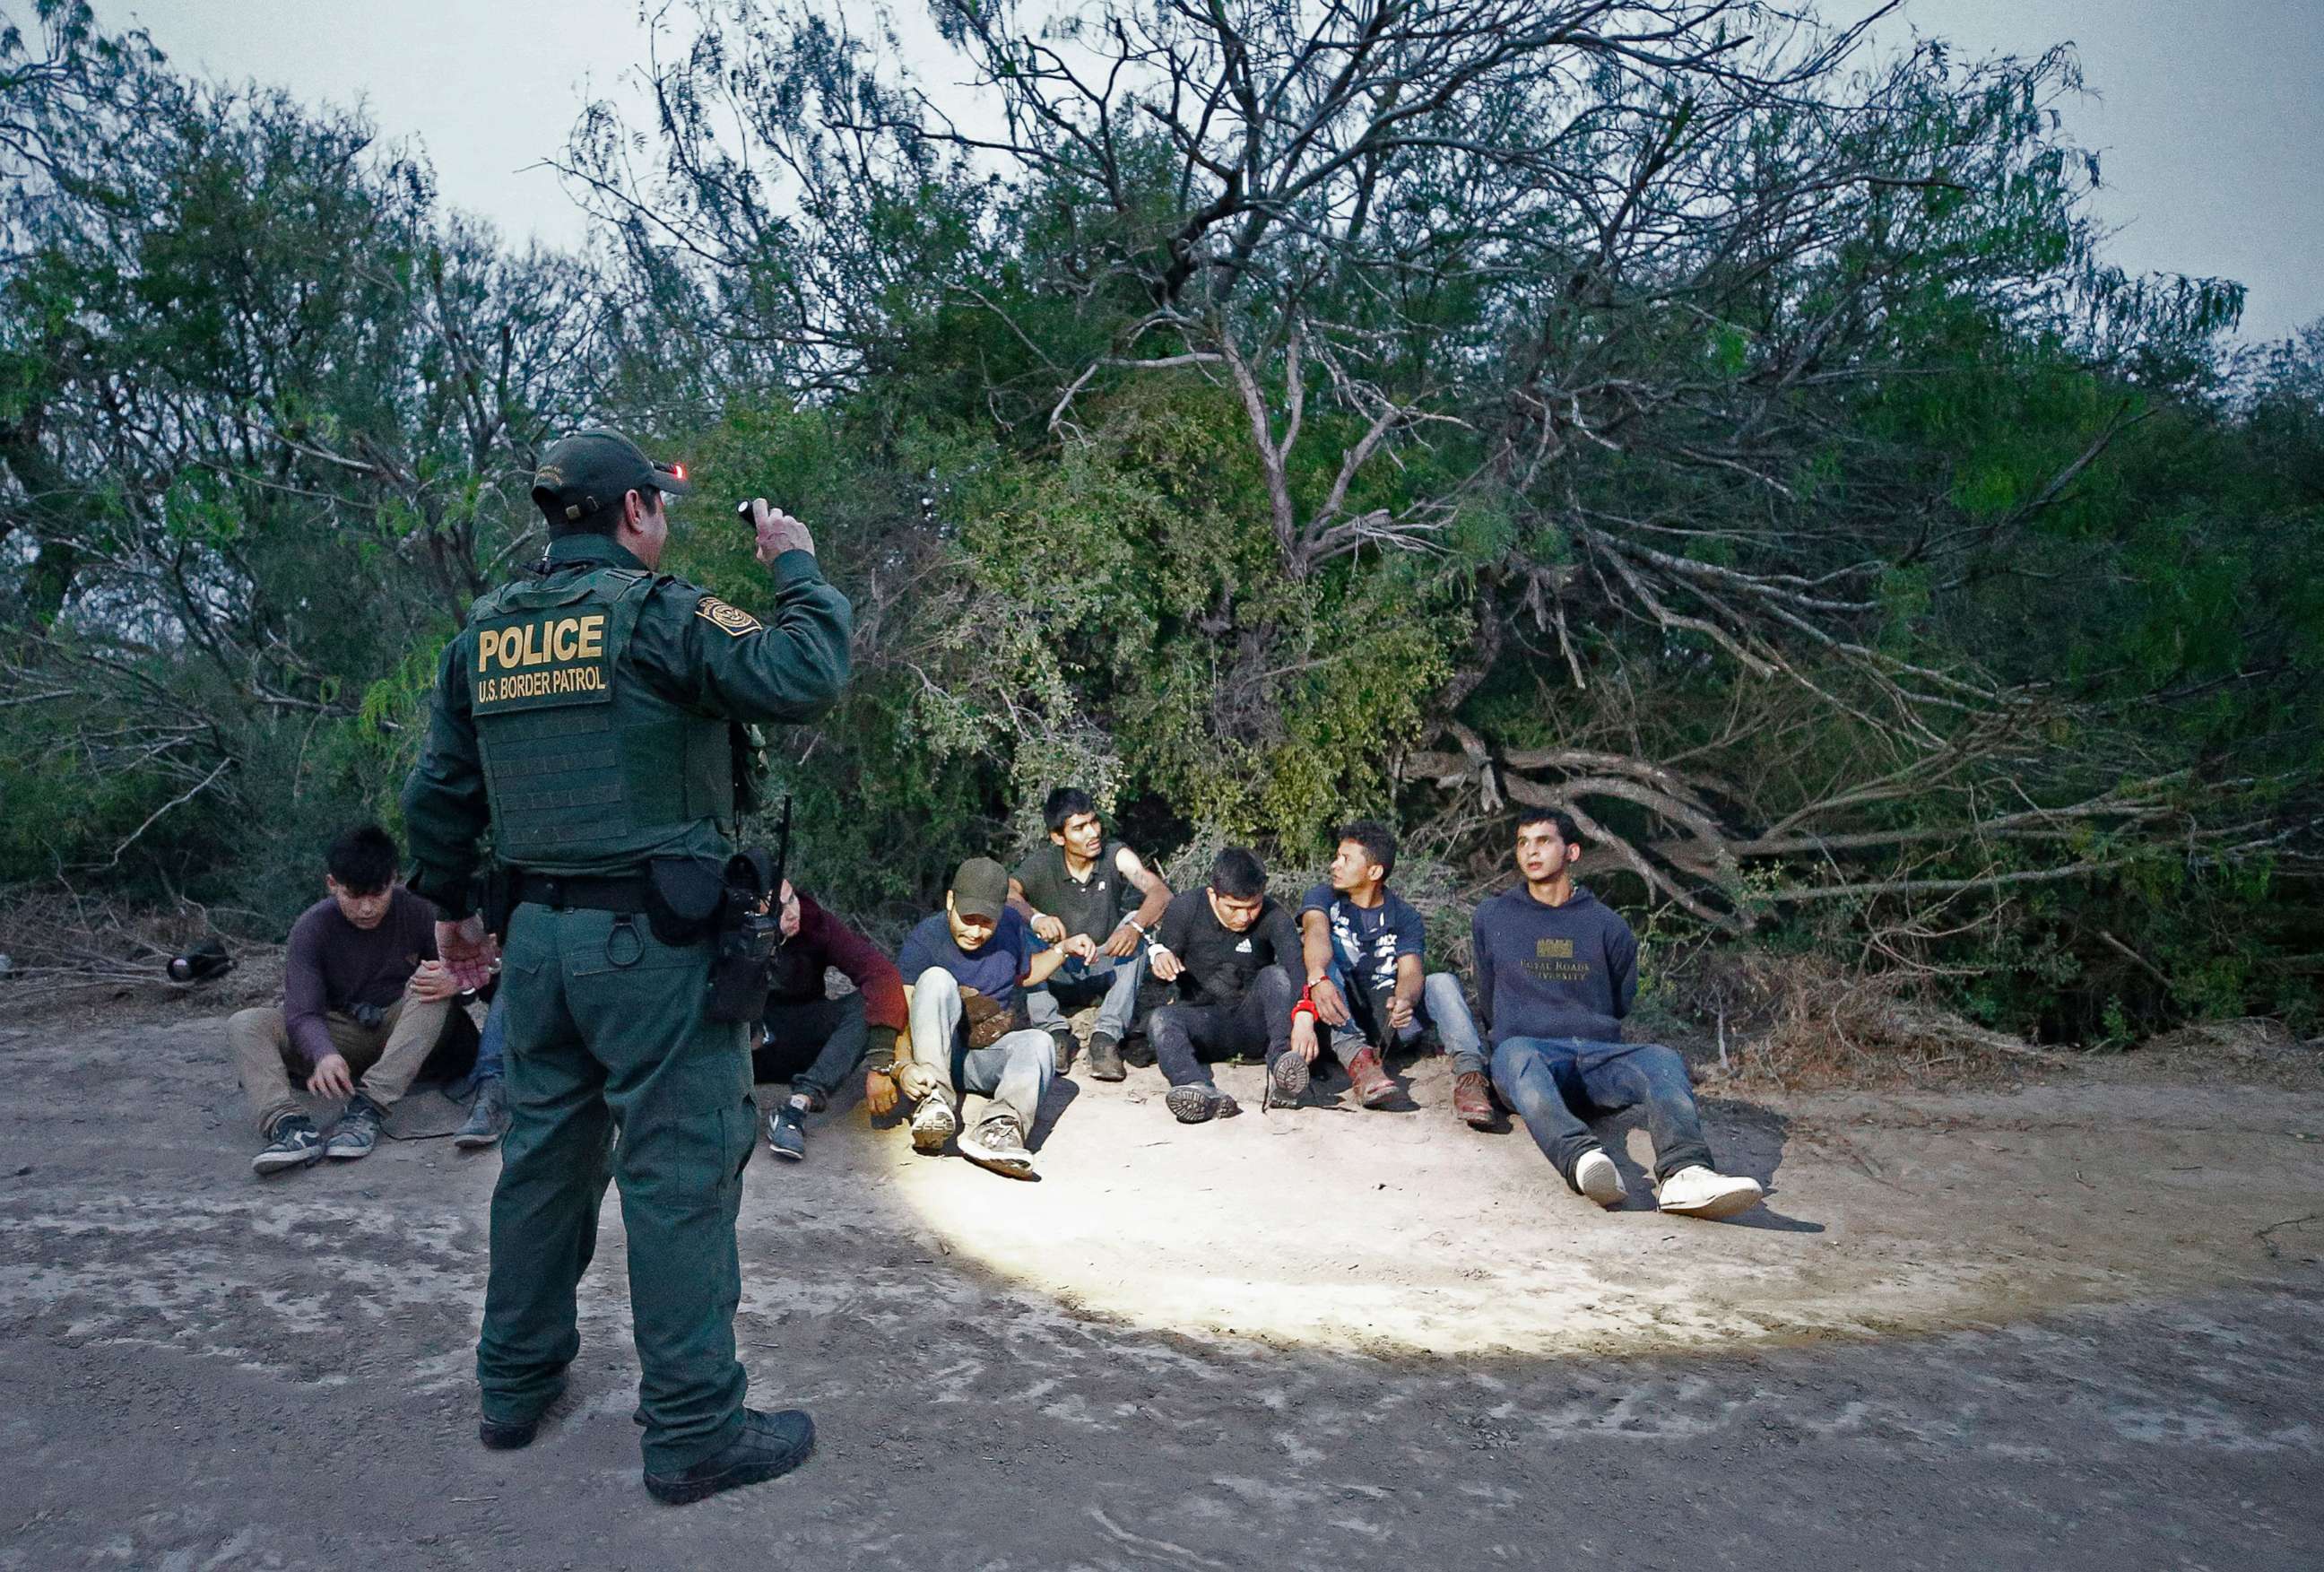 PHOTO: U.S. Border Patrol agents apprehend people suspected of crossing the Rio Grande River to enter the United States illegally near McAllen, Texas, March 4, 2020.